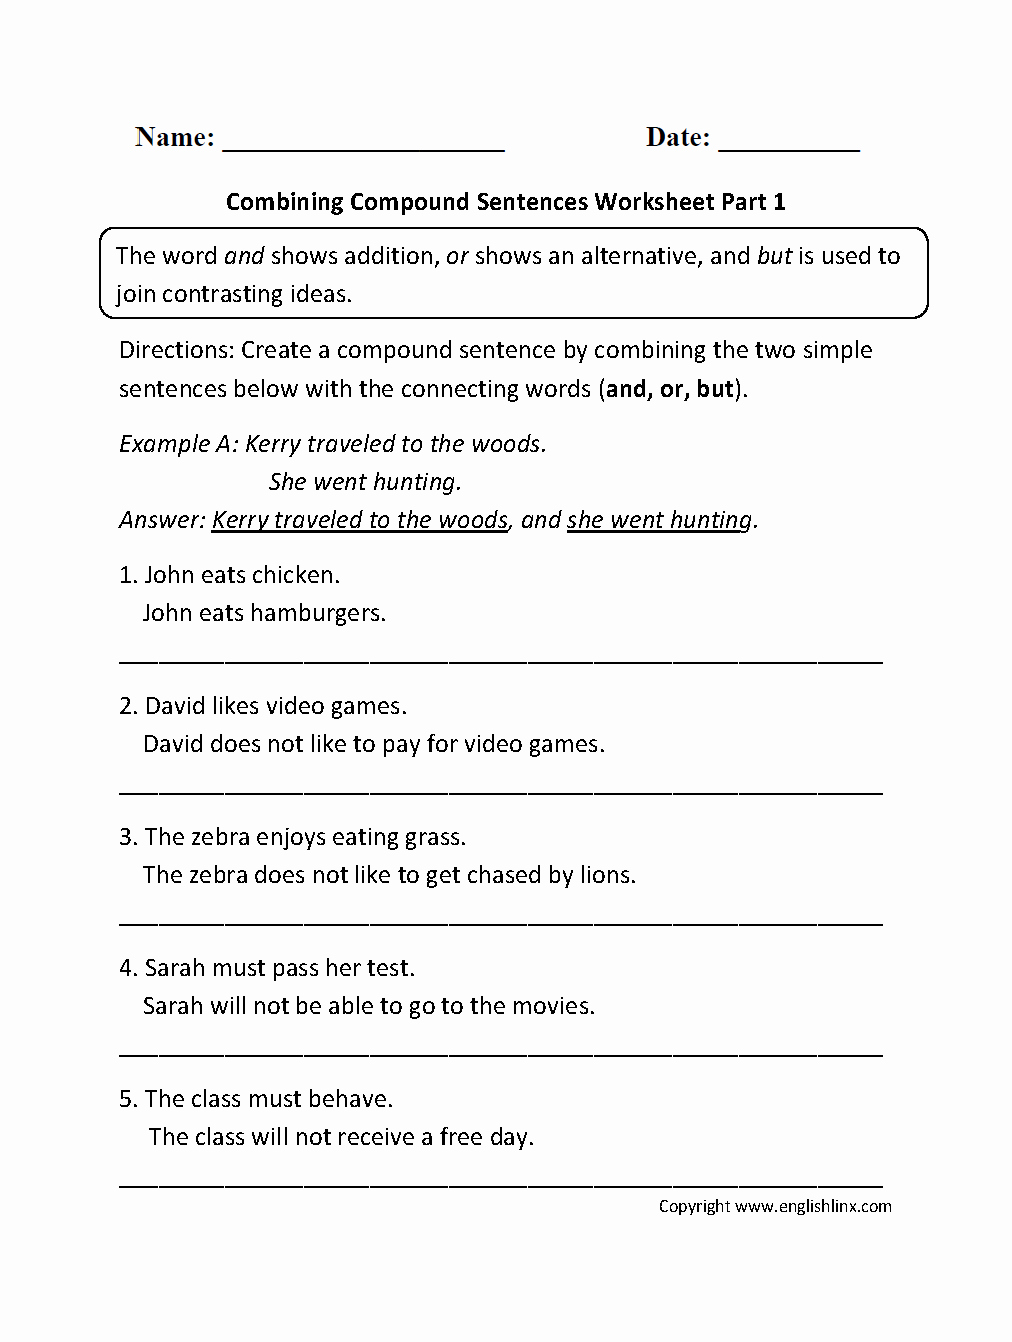 Simple and Compound Sentences Worksheet New Bining Pound Sentences Worksheet Part 1